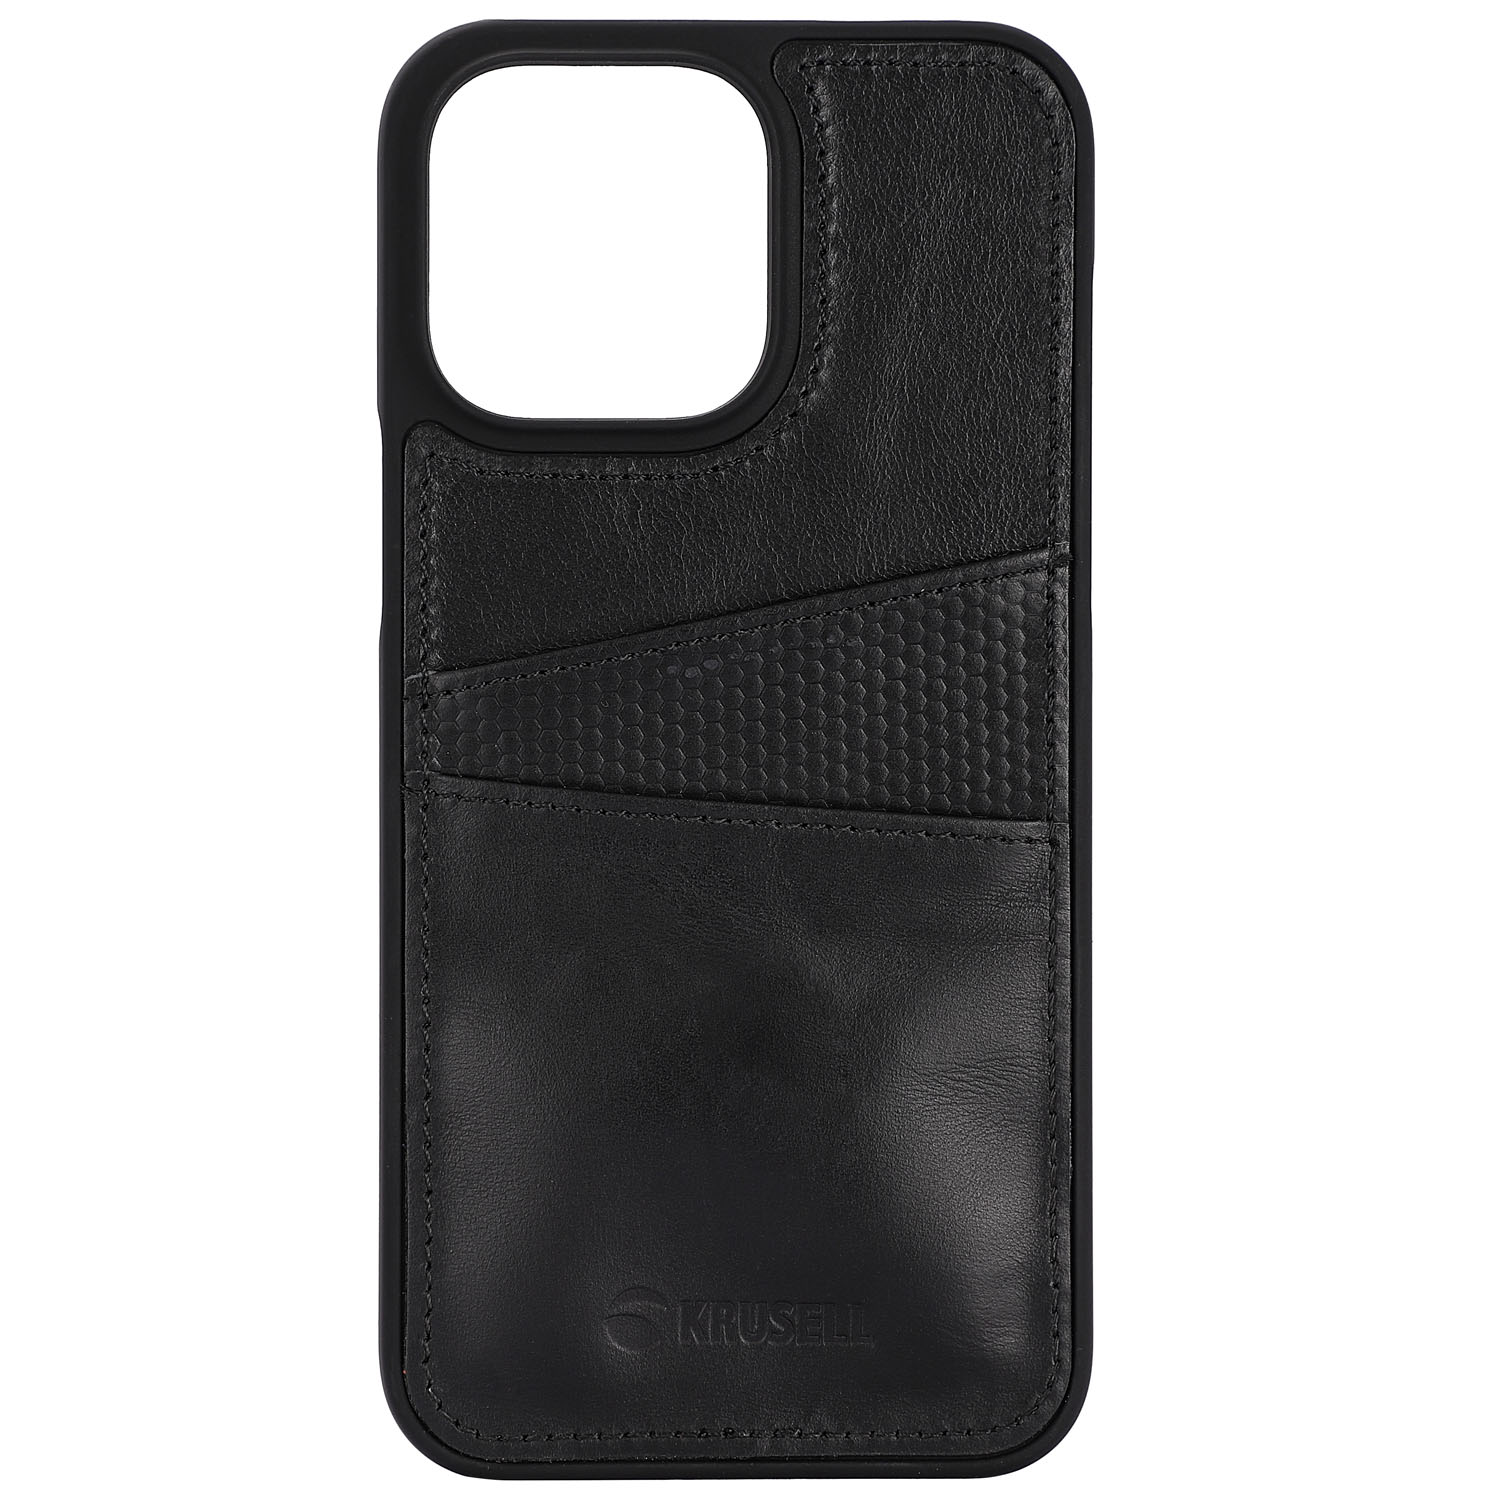 KRUSELL Leder iPhone Schwarz CardCover Apple, Max, Max 14 iPhone Pro Pro Schwarz, Backcover, 14